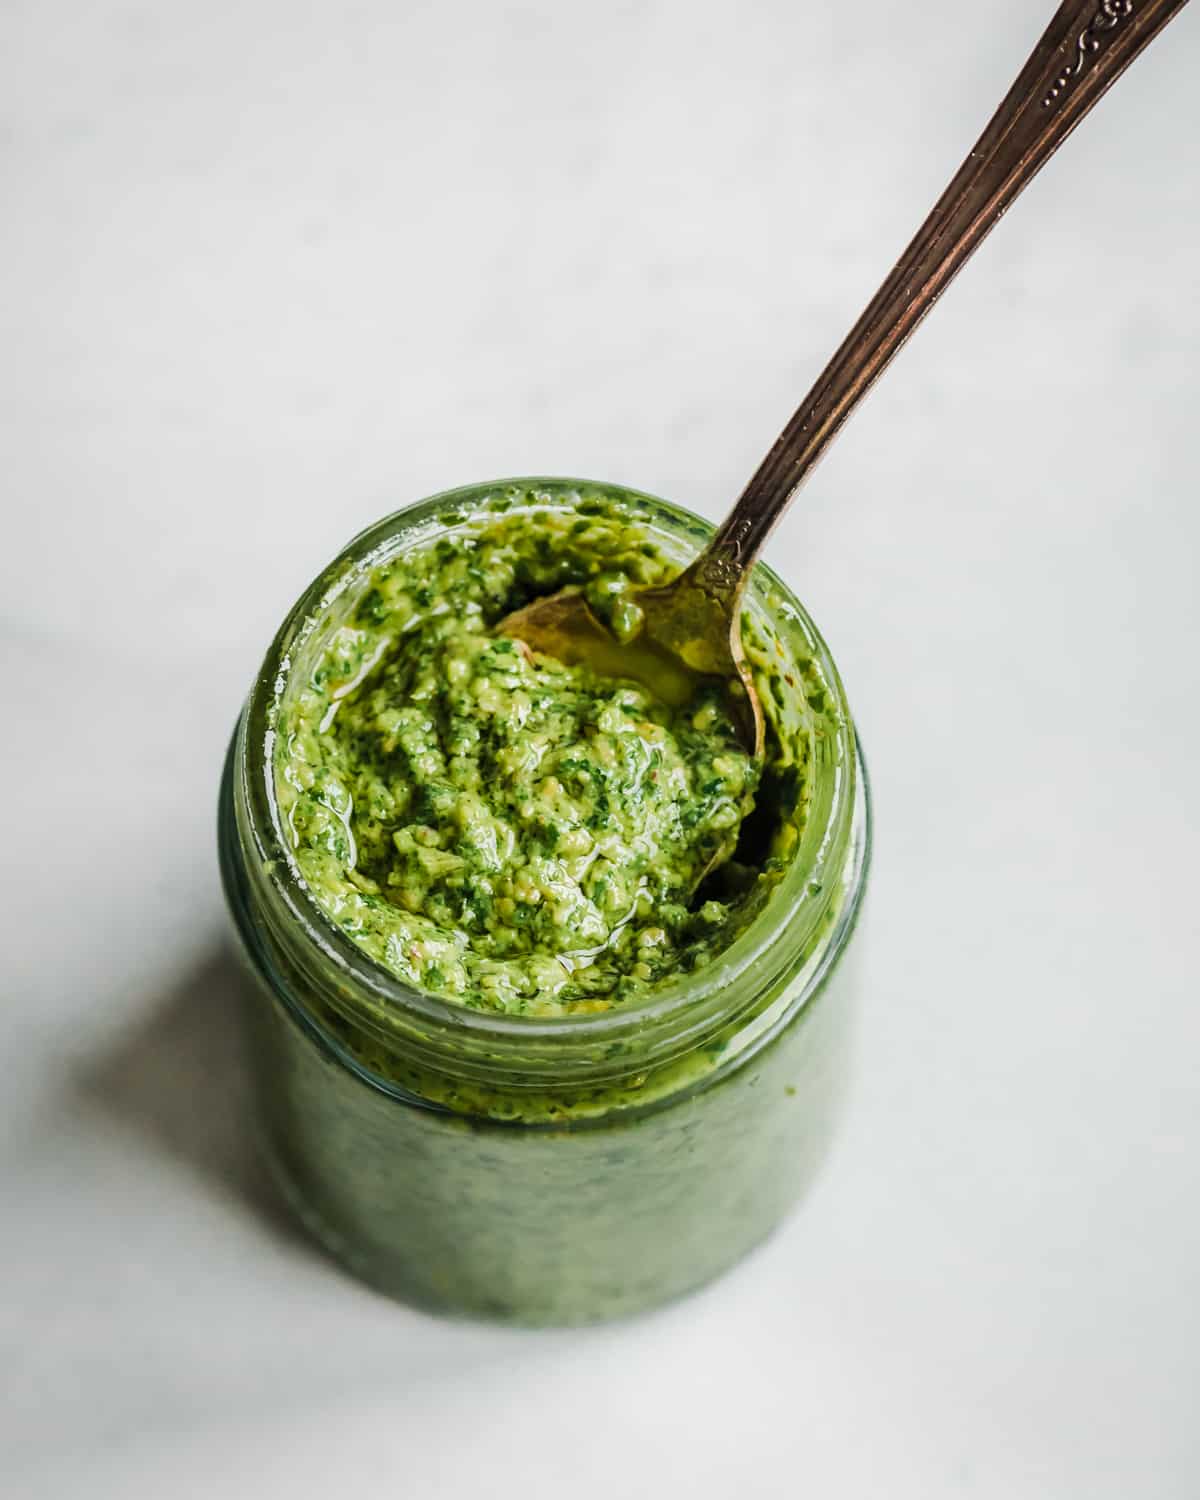 Overhead view of a small glass jar with pesto and a spoon in it.